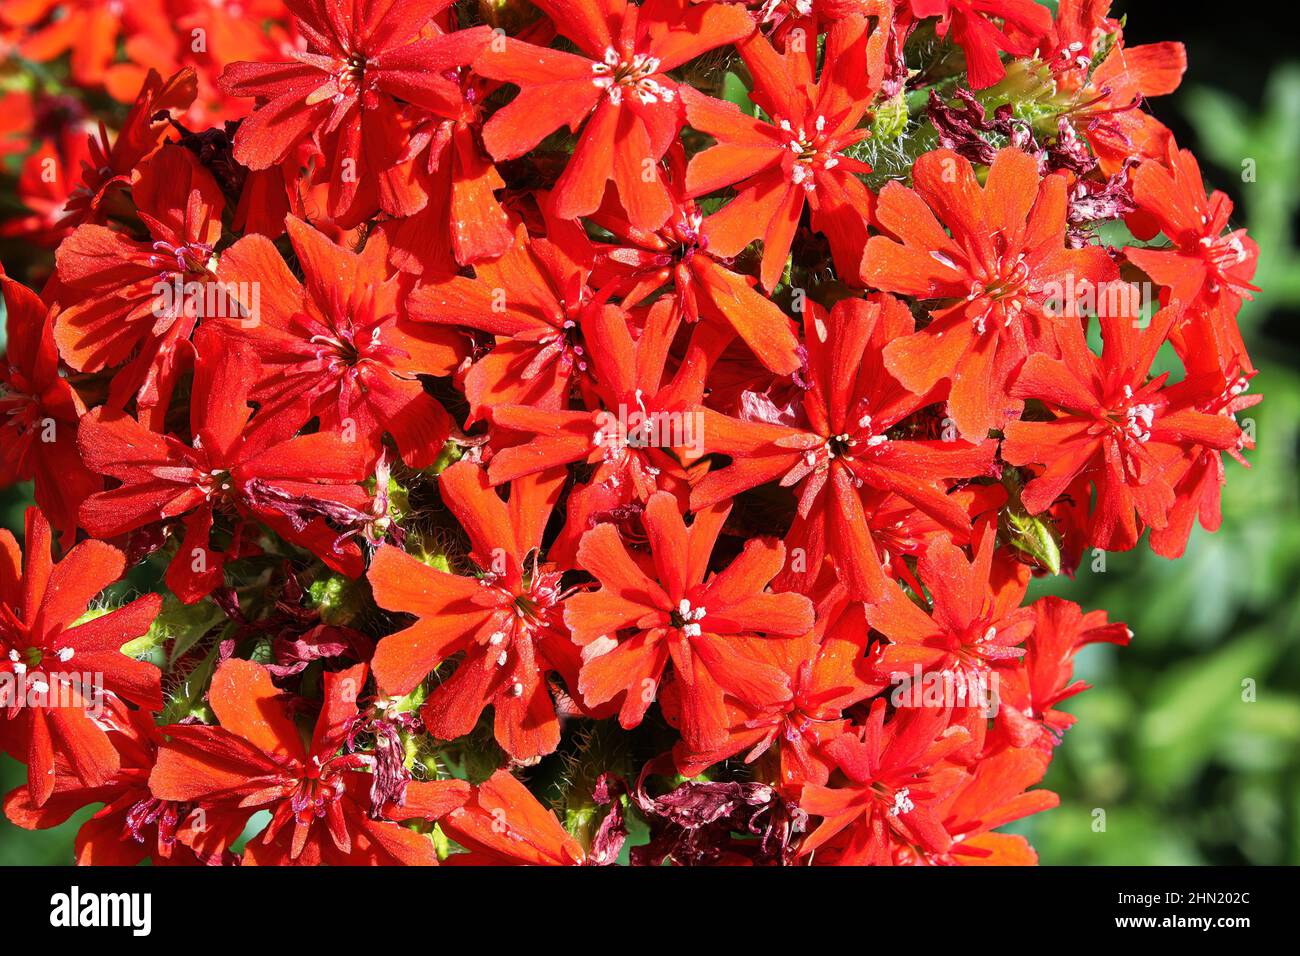 Closeup view of the red flowers on a maltese cross plant Stock Photo